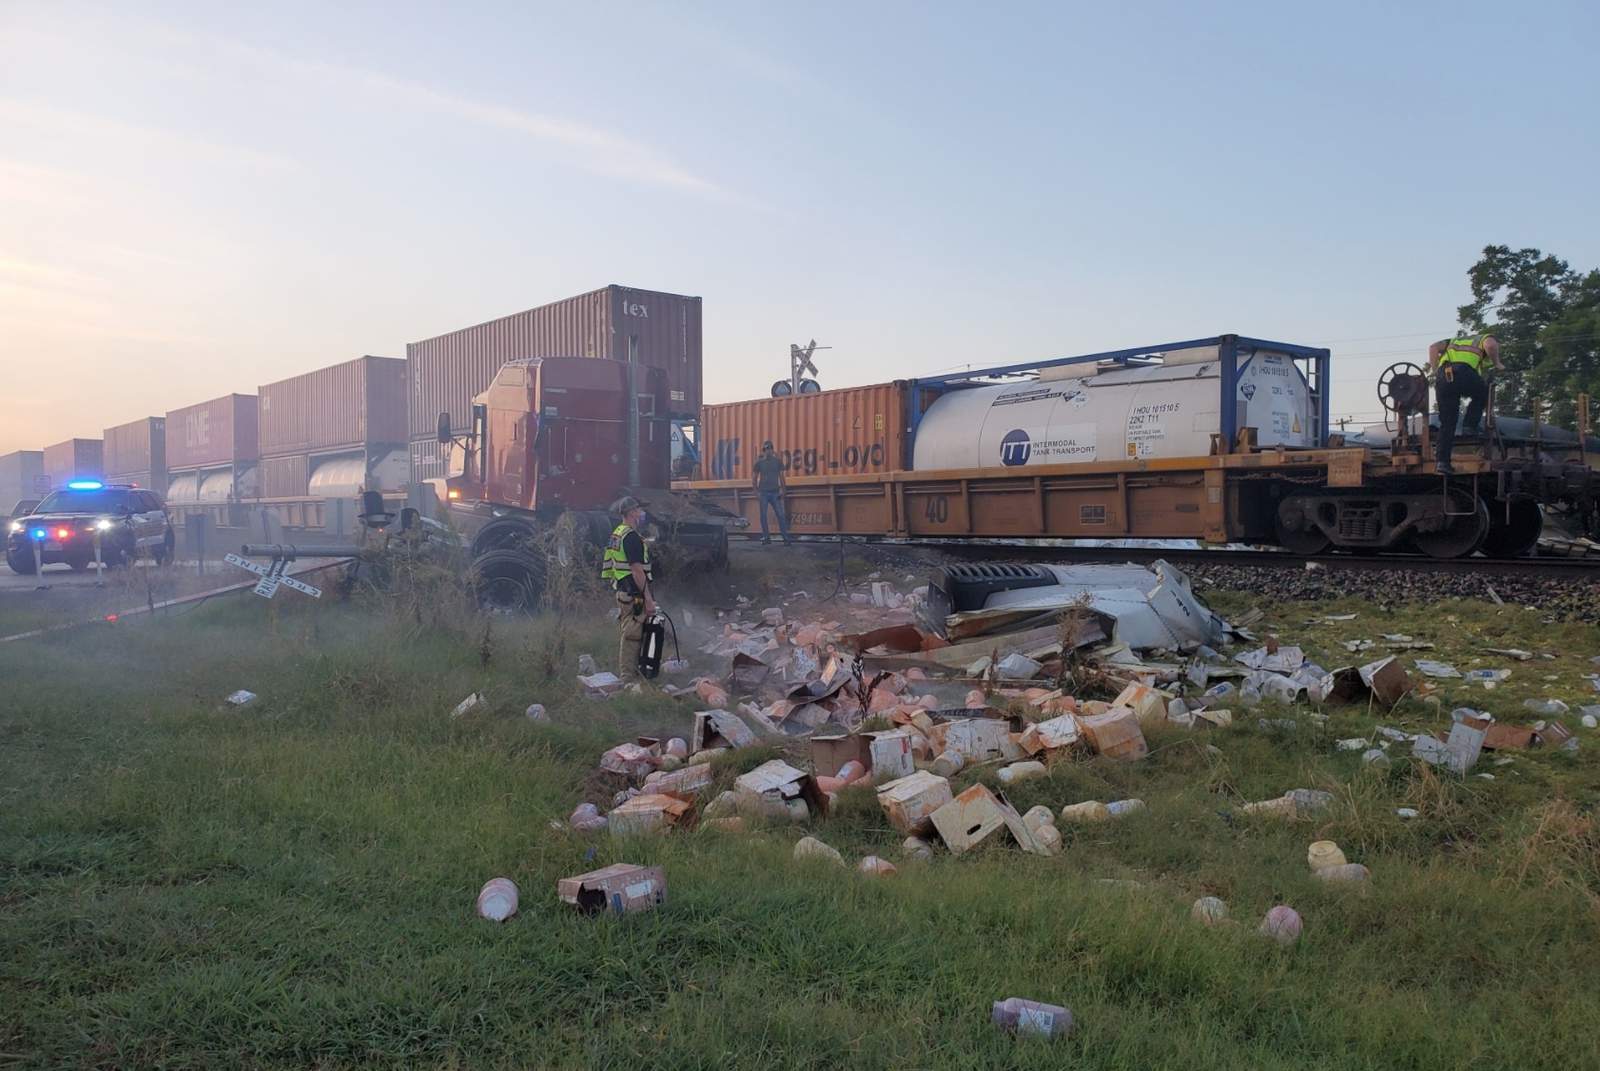 18-wheeler struck by train in Cibolo, no injuries reported, police say